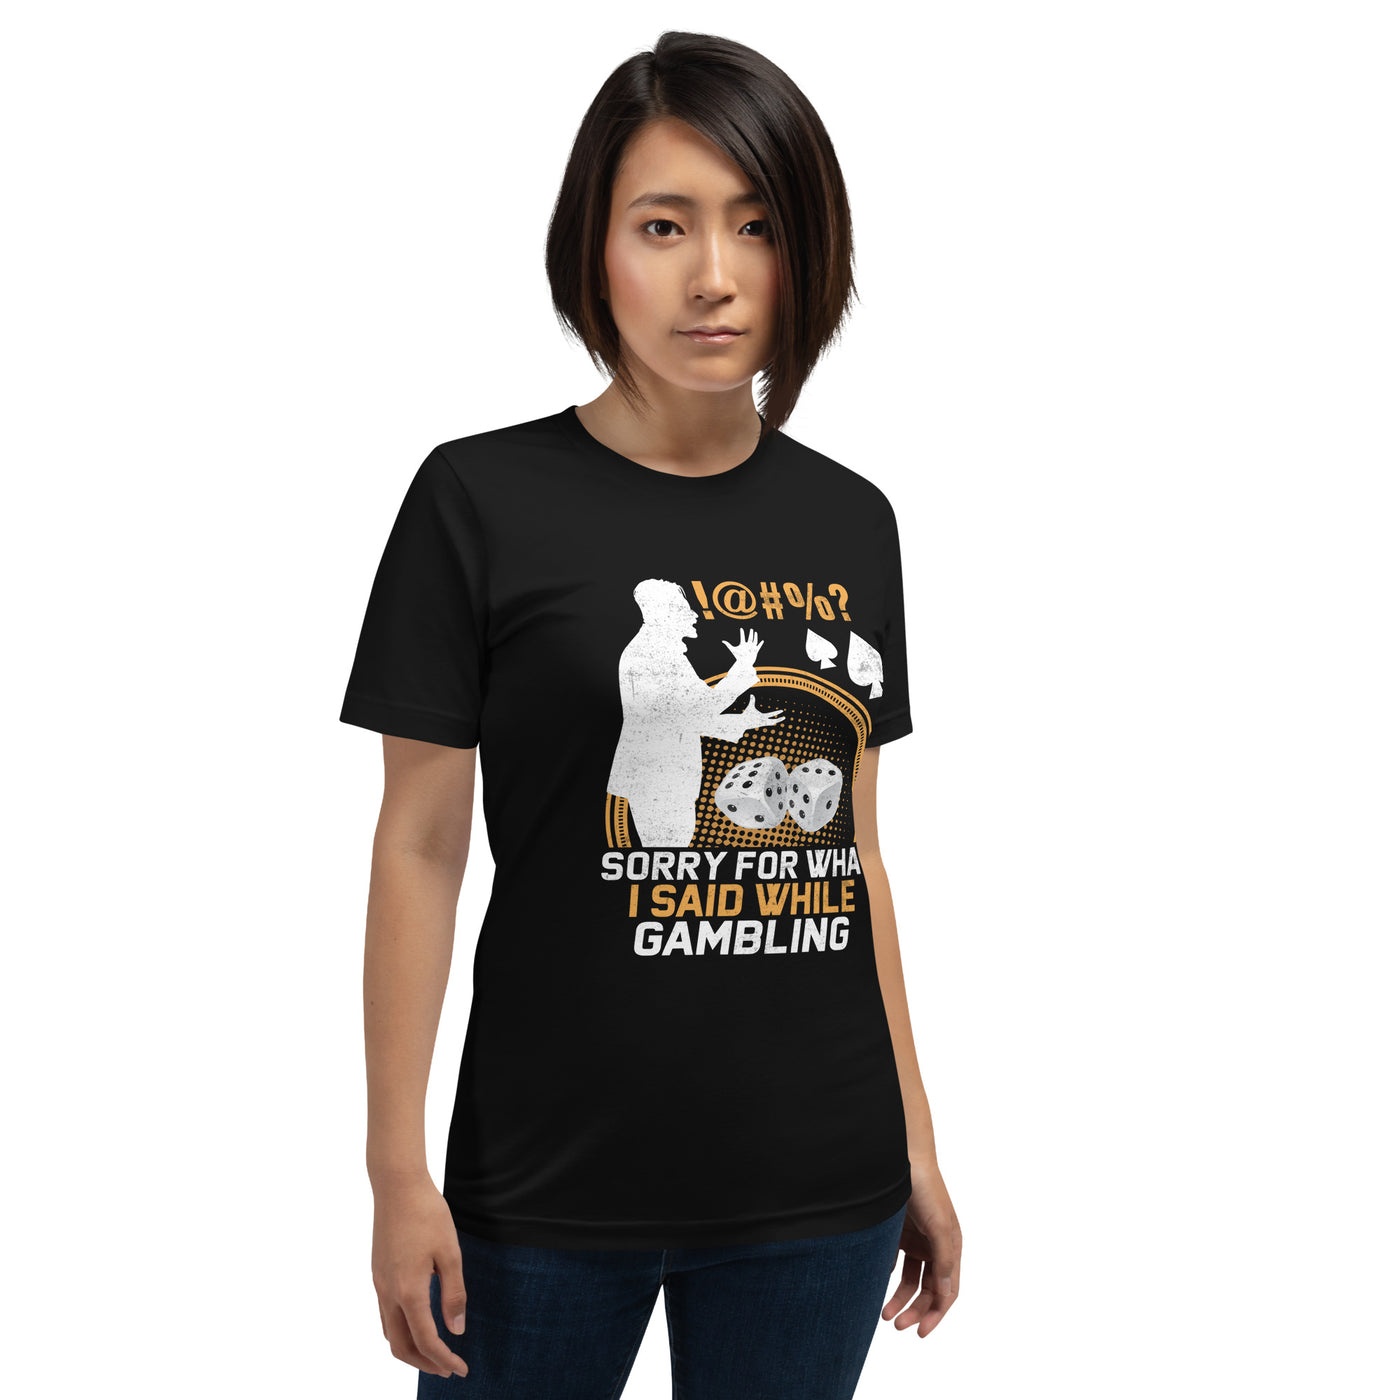 Sorry for what I Said while Gambling - Unisex t-shirt